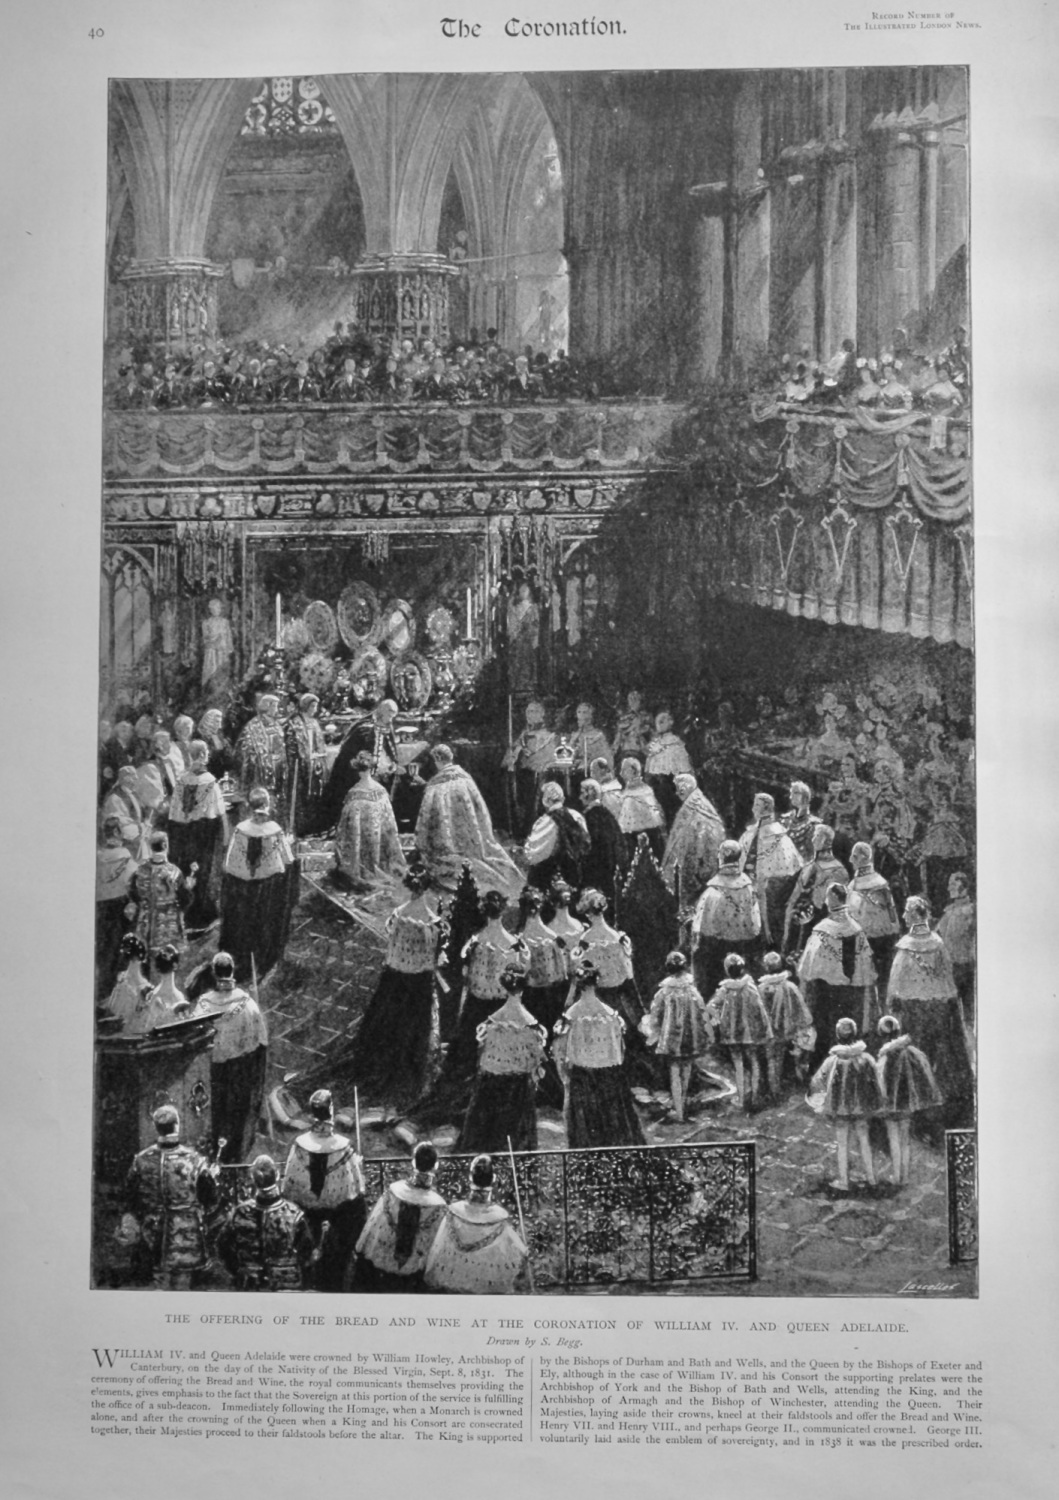 The Offering of the Bread and Wine at the Coronation of William IV. and Que